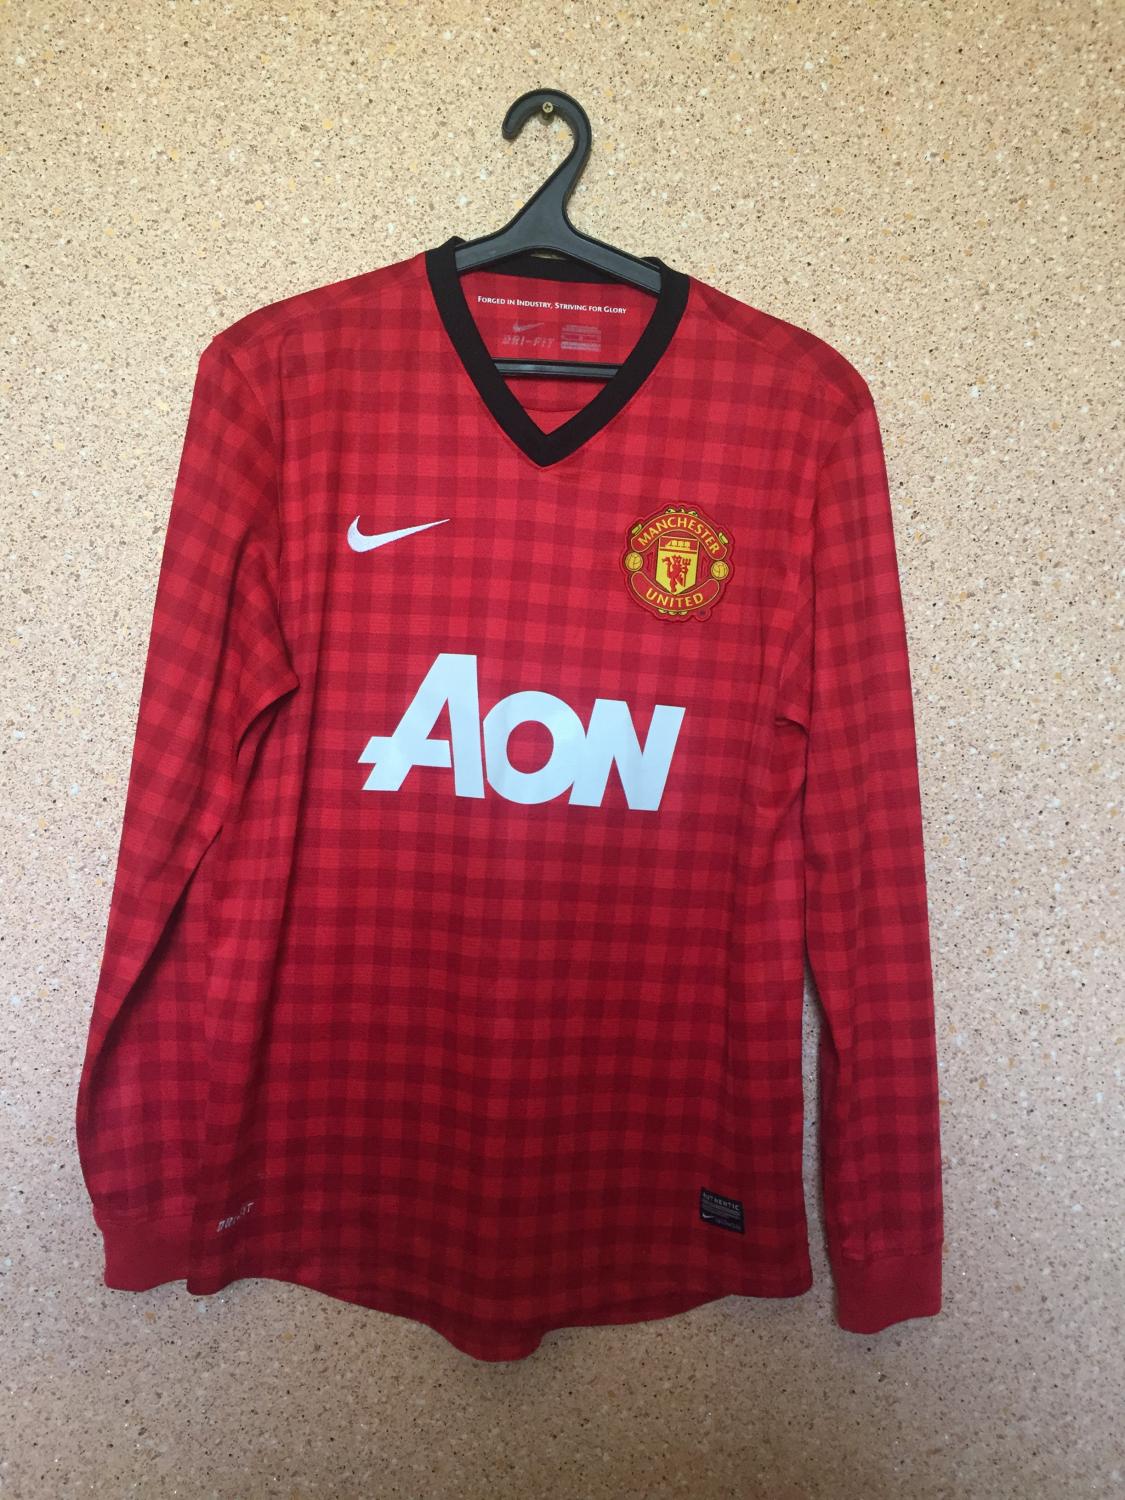 Manchester United Home football shirt 2012 - 2013. Added on 2015-10-17 ...